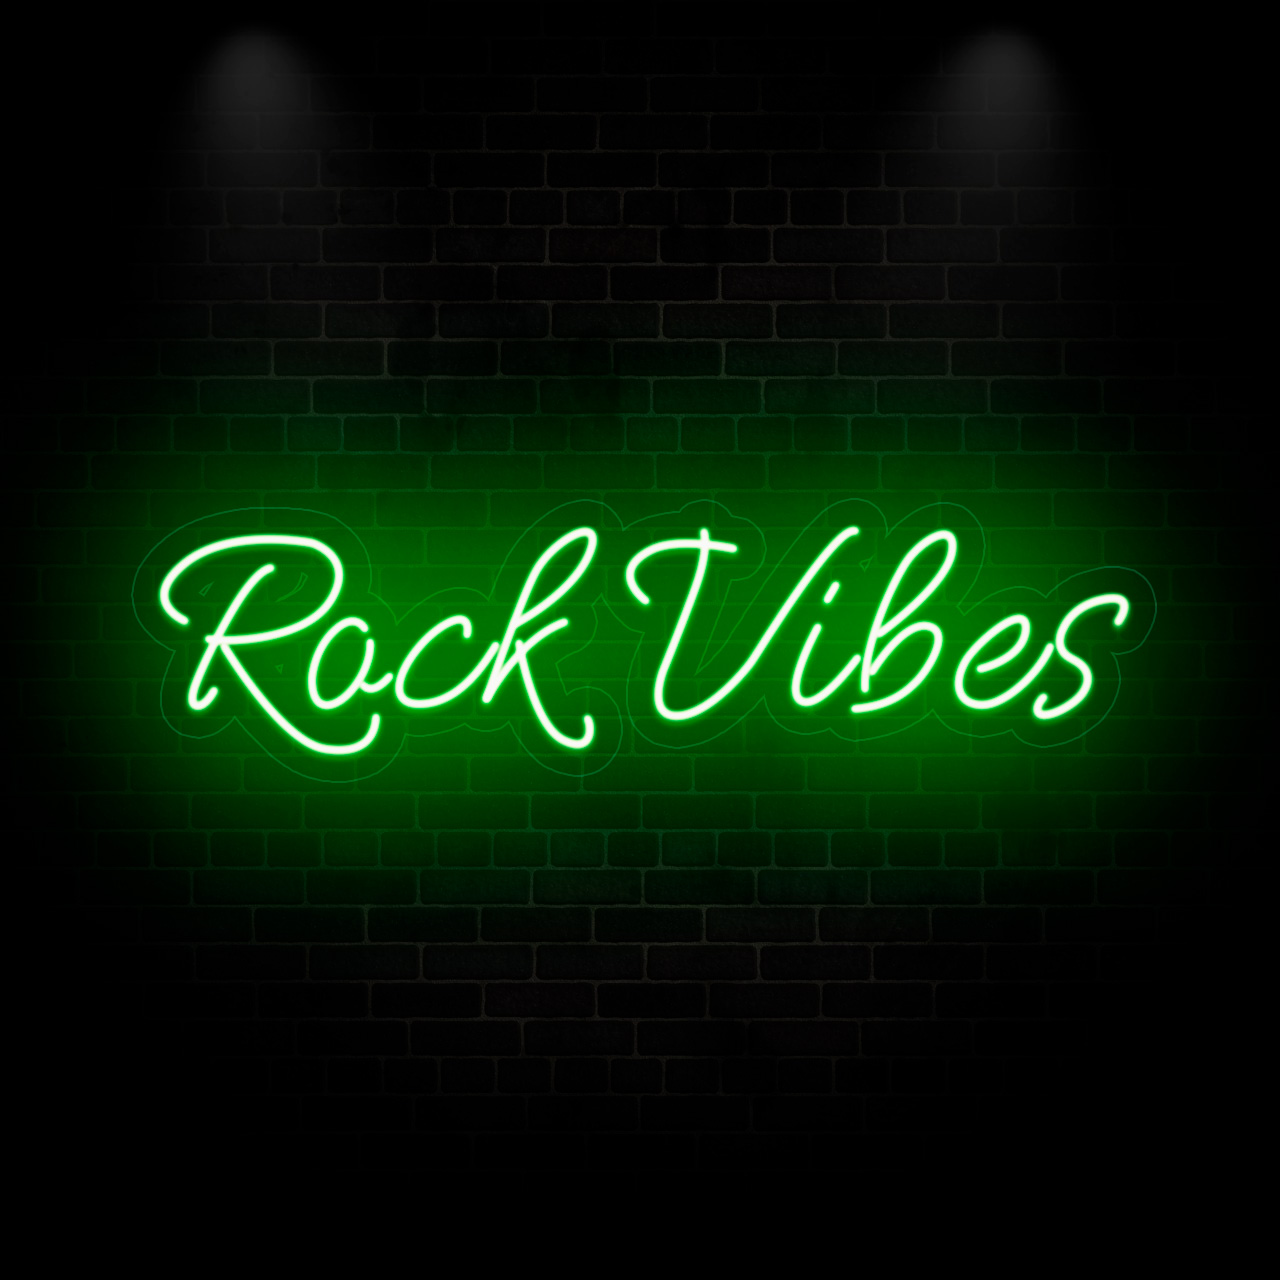 Rock Vibes Neon Signs